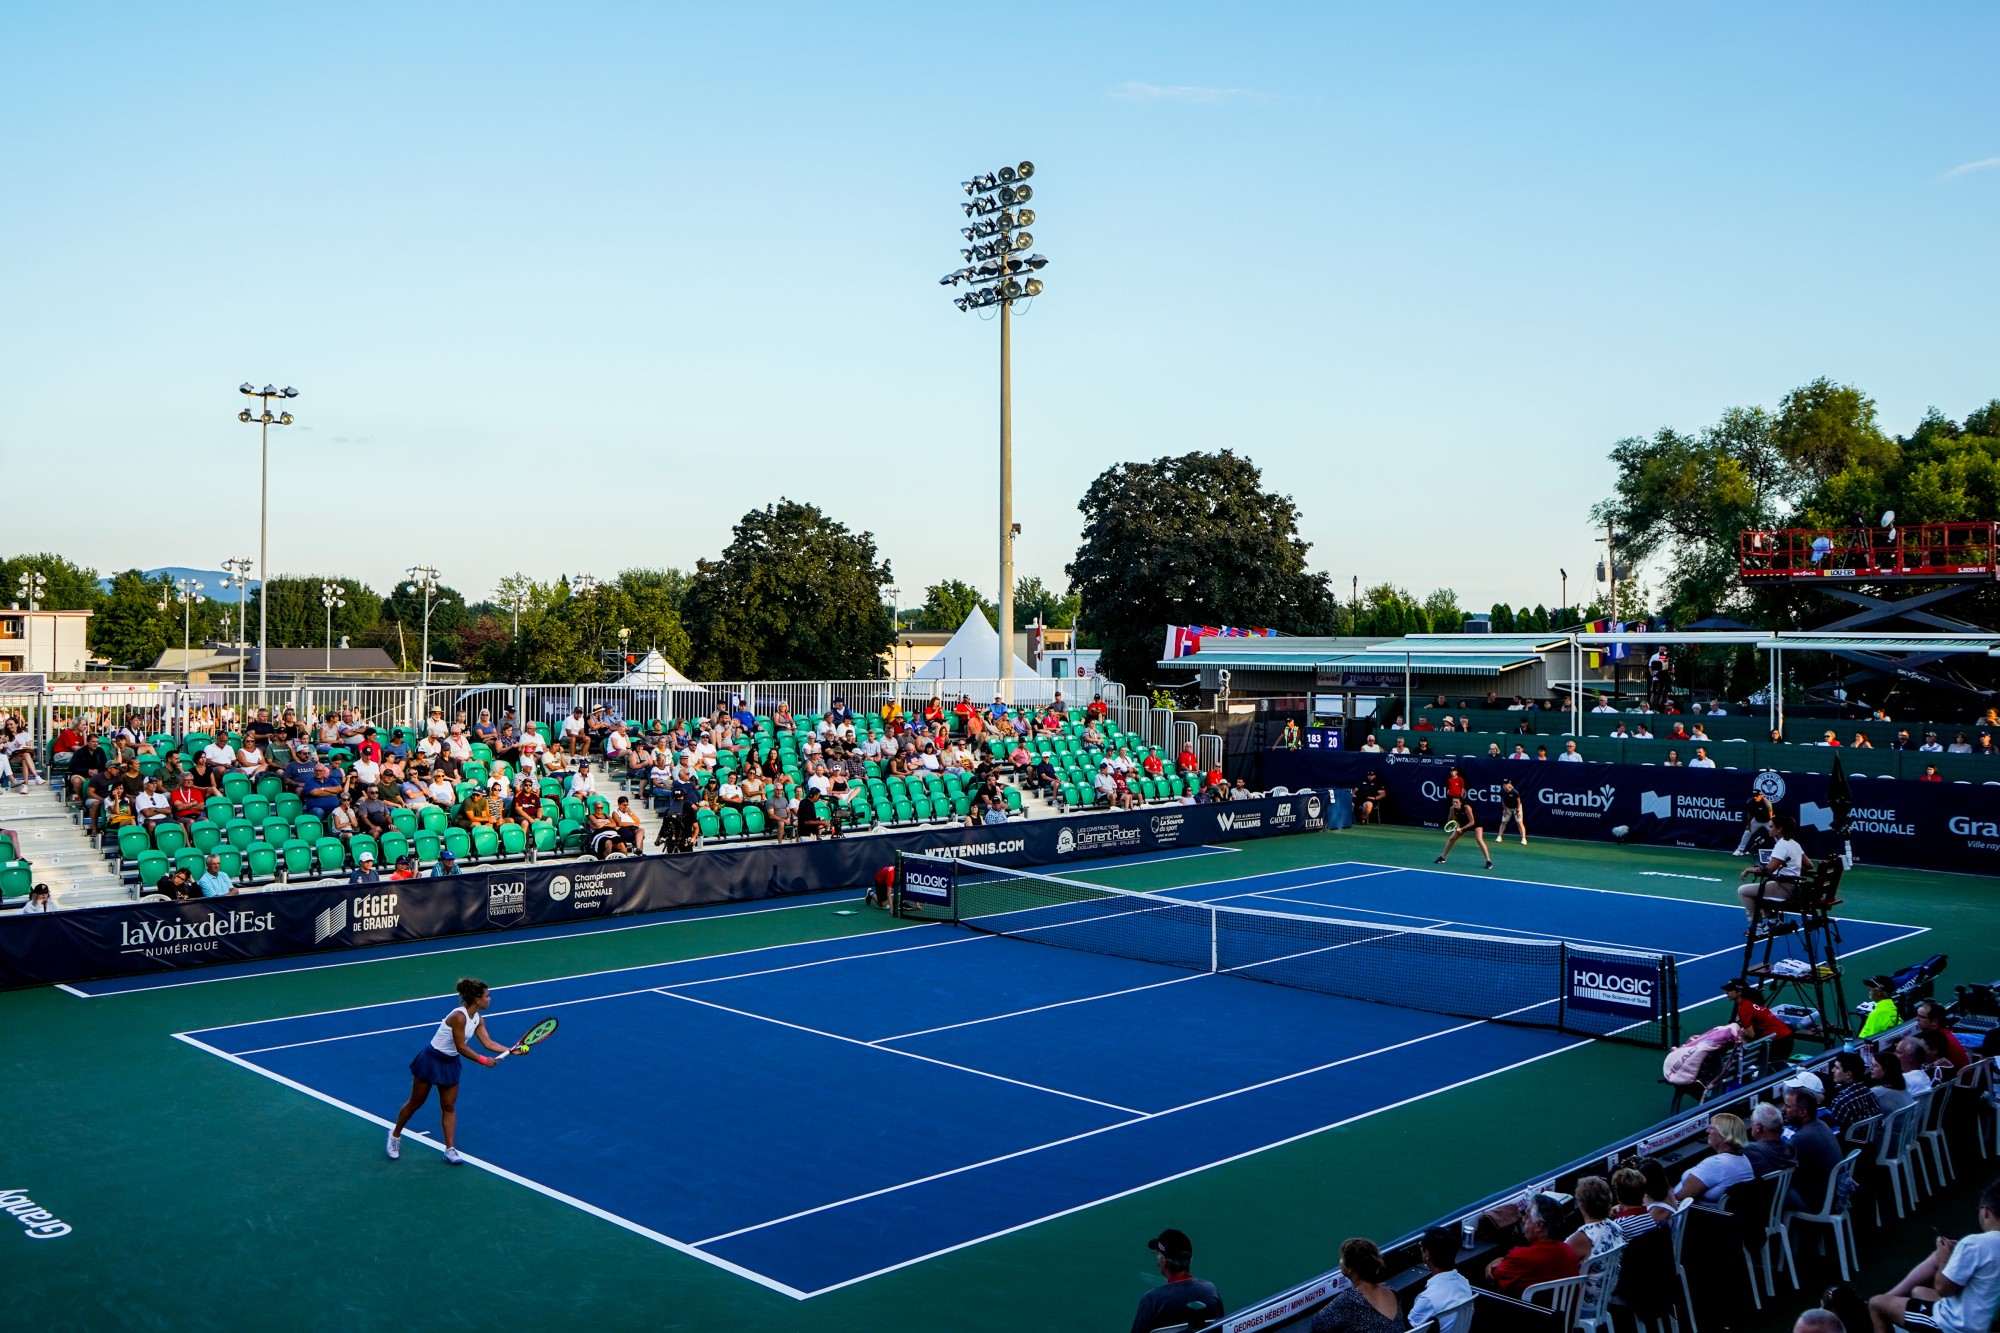 Tennis Canada announces changes to the 2023 Canadian Professional Tennis Calendar